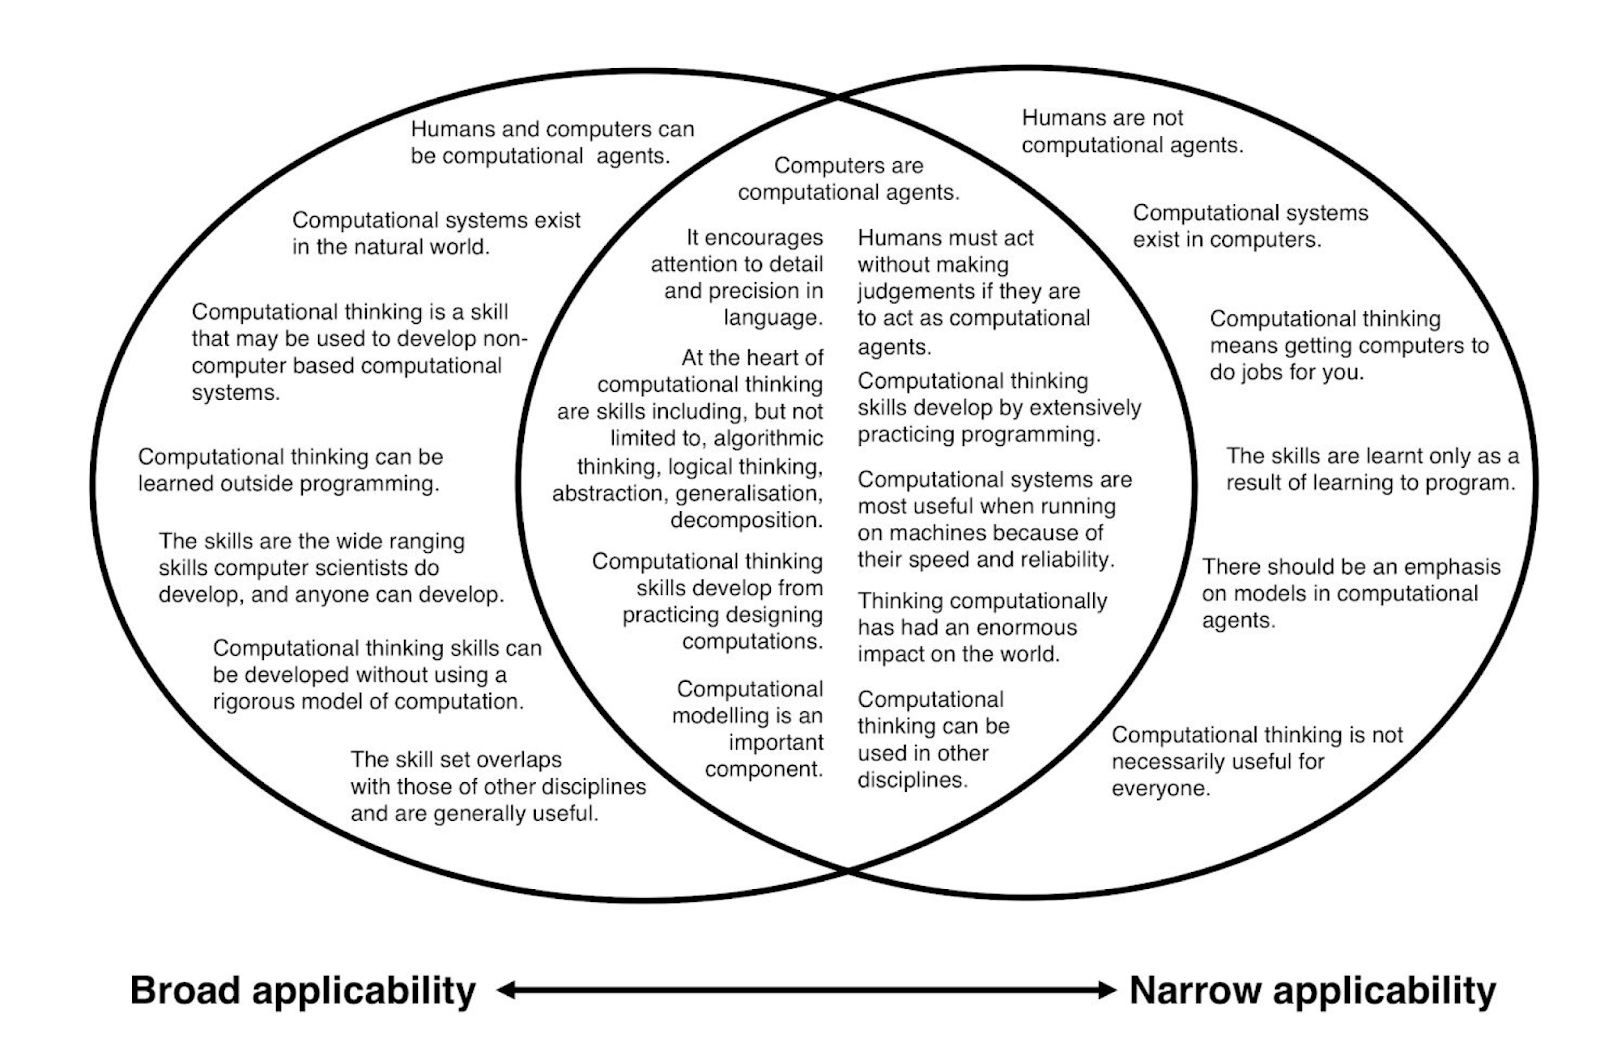 Venn diagram showing varying definitions of CT, ranging from broad to narrow applicability